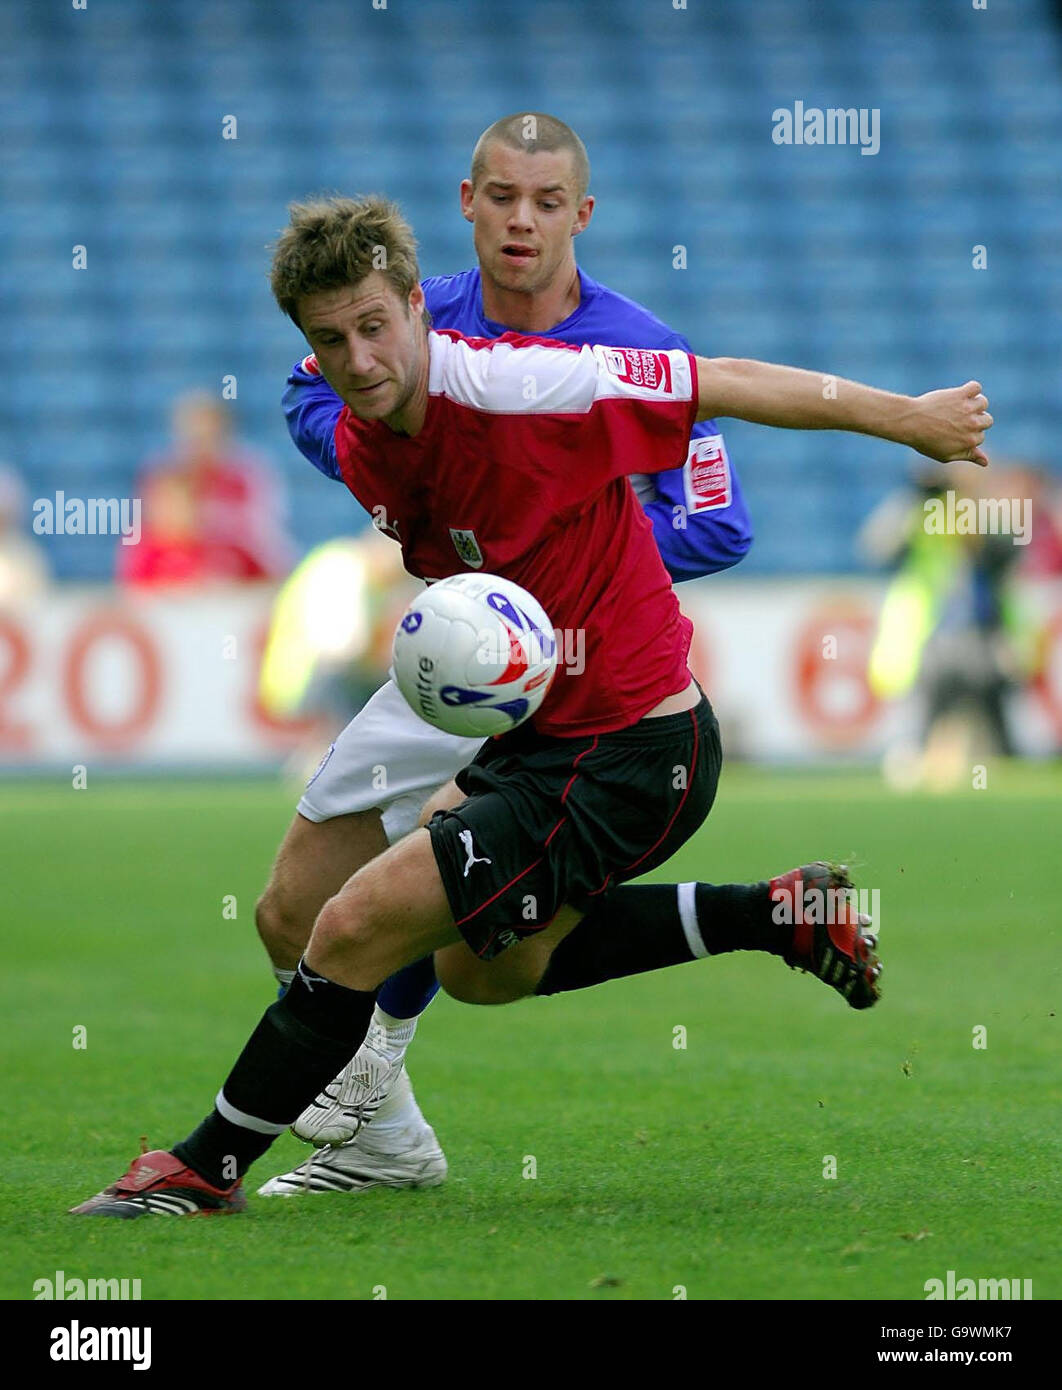 Bristol City's David Noble and Millwall's Alan Dunne battle for the ball during the Coca-Cola Football League One match at the New Den, Millwall. Stock Photo